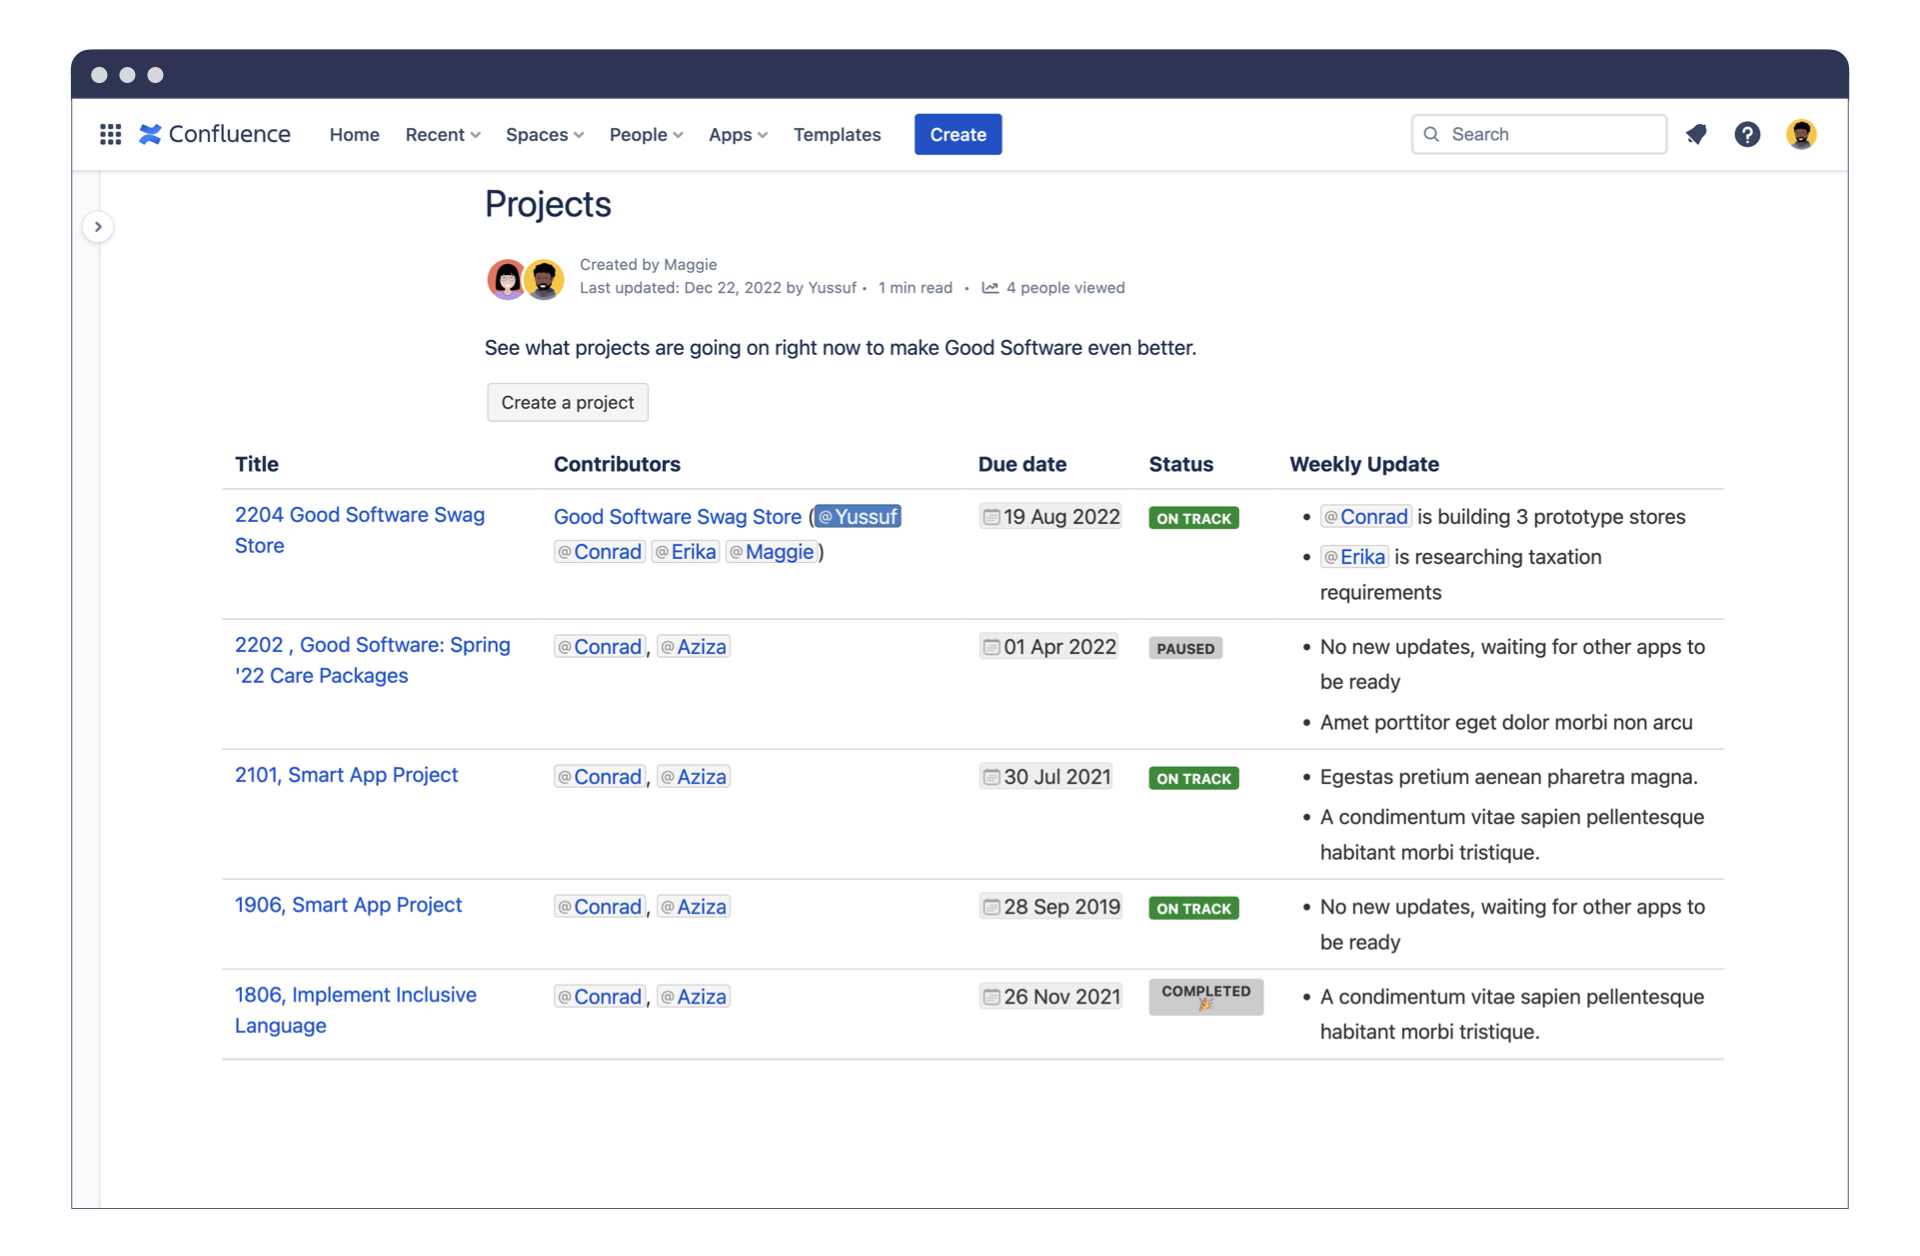 Confluence page displaying a project overview list.